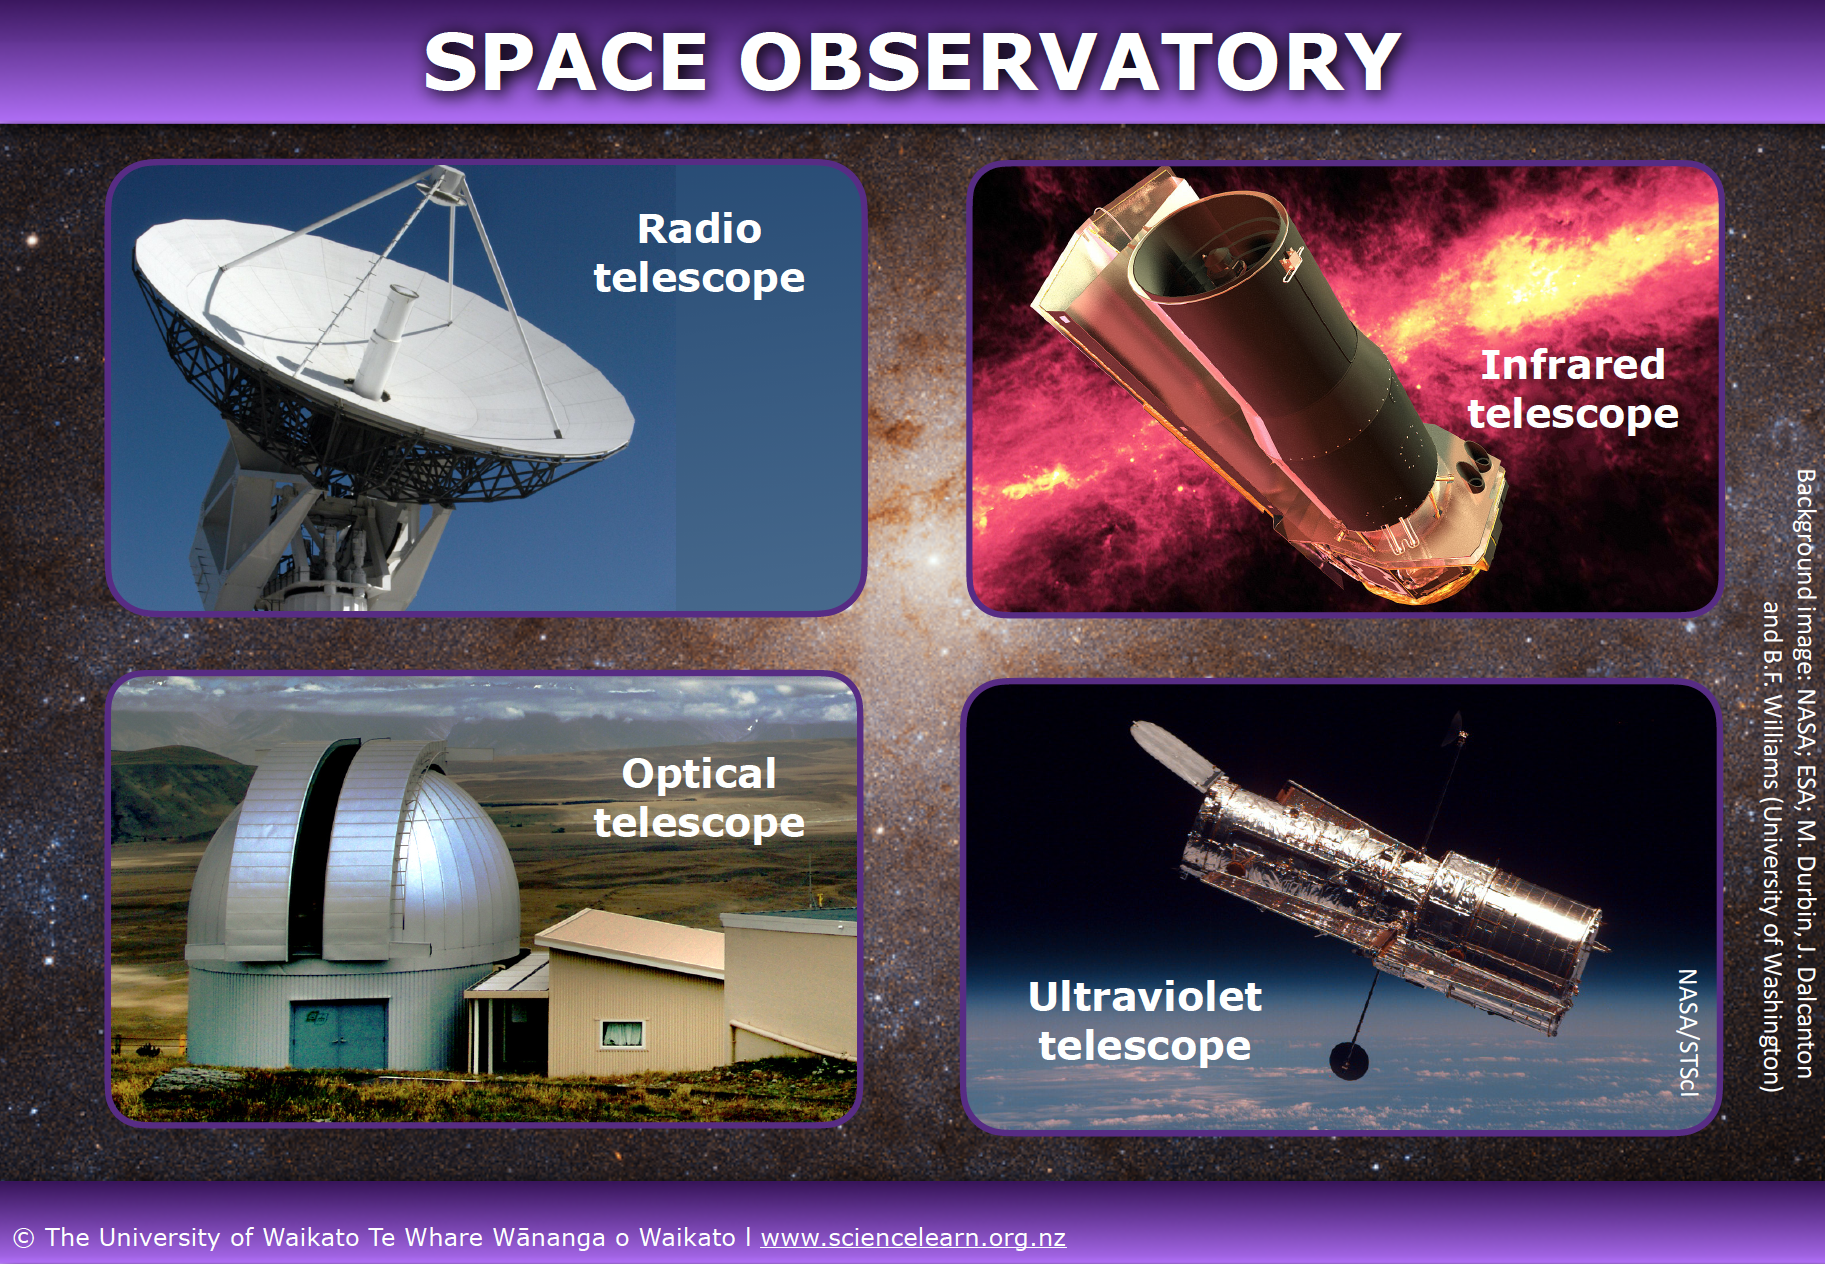 Space observatory interactive image map